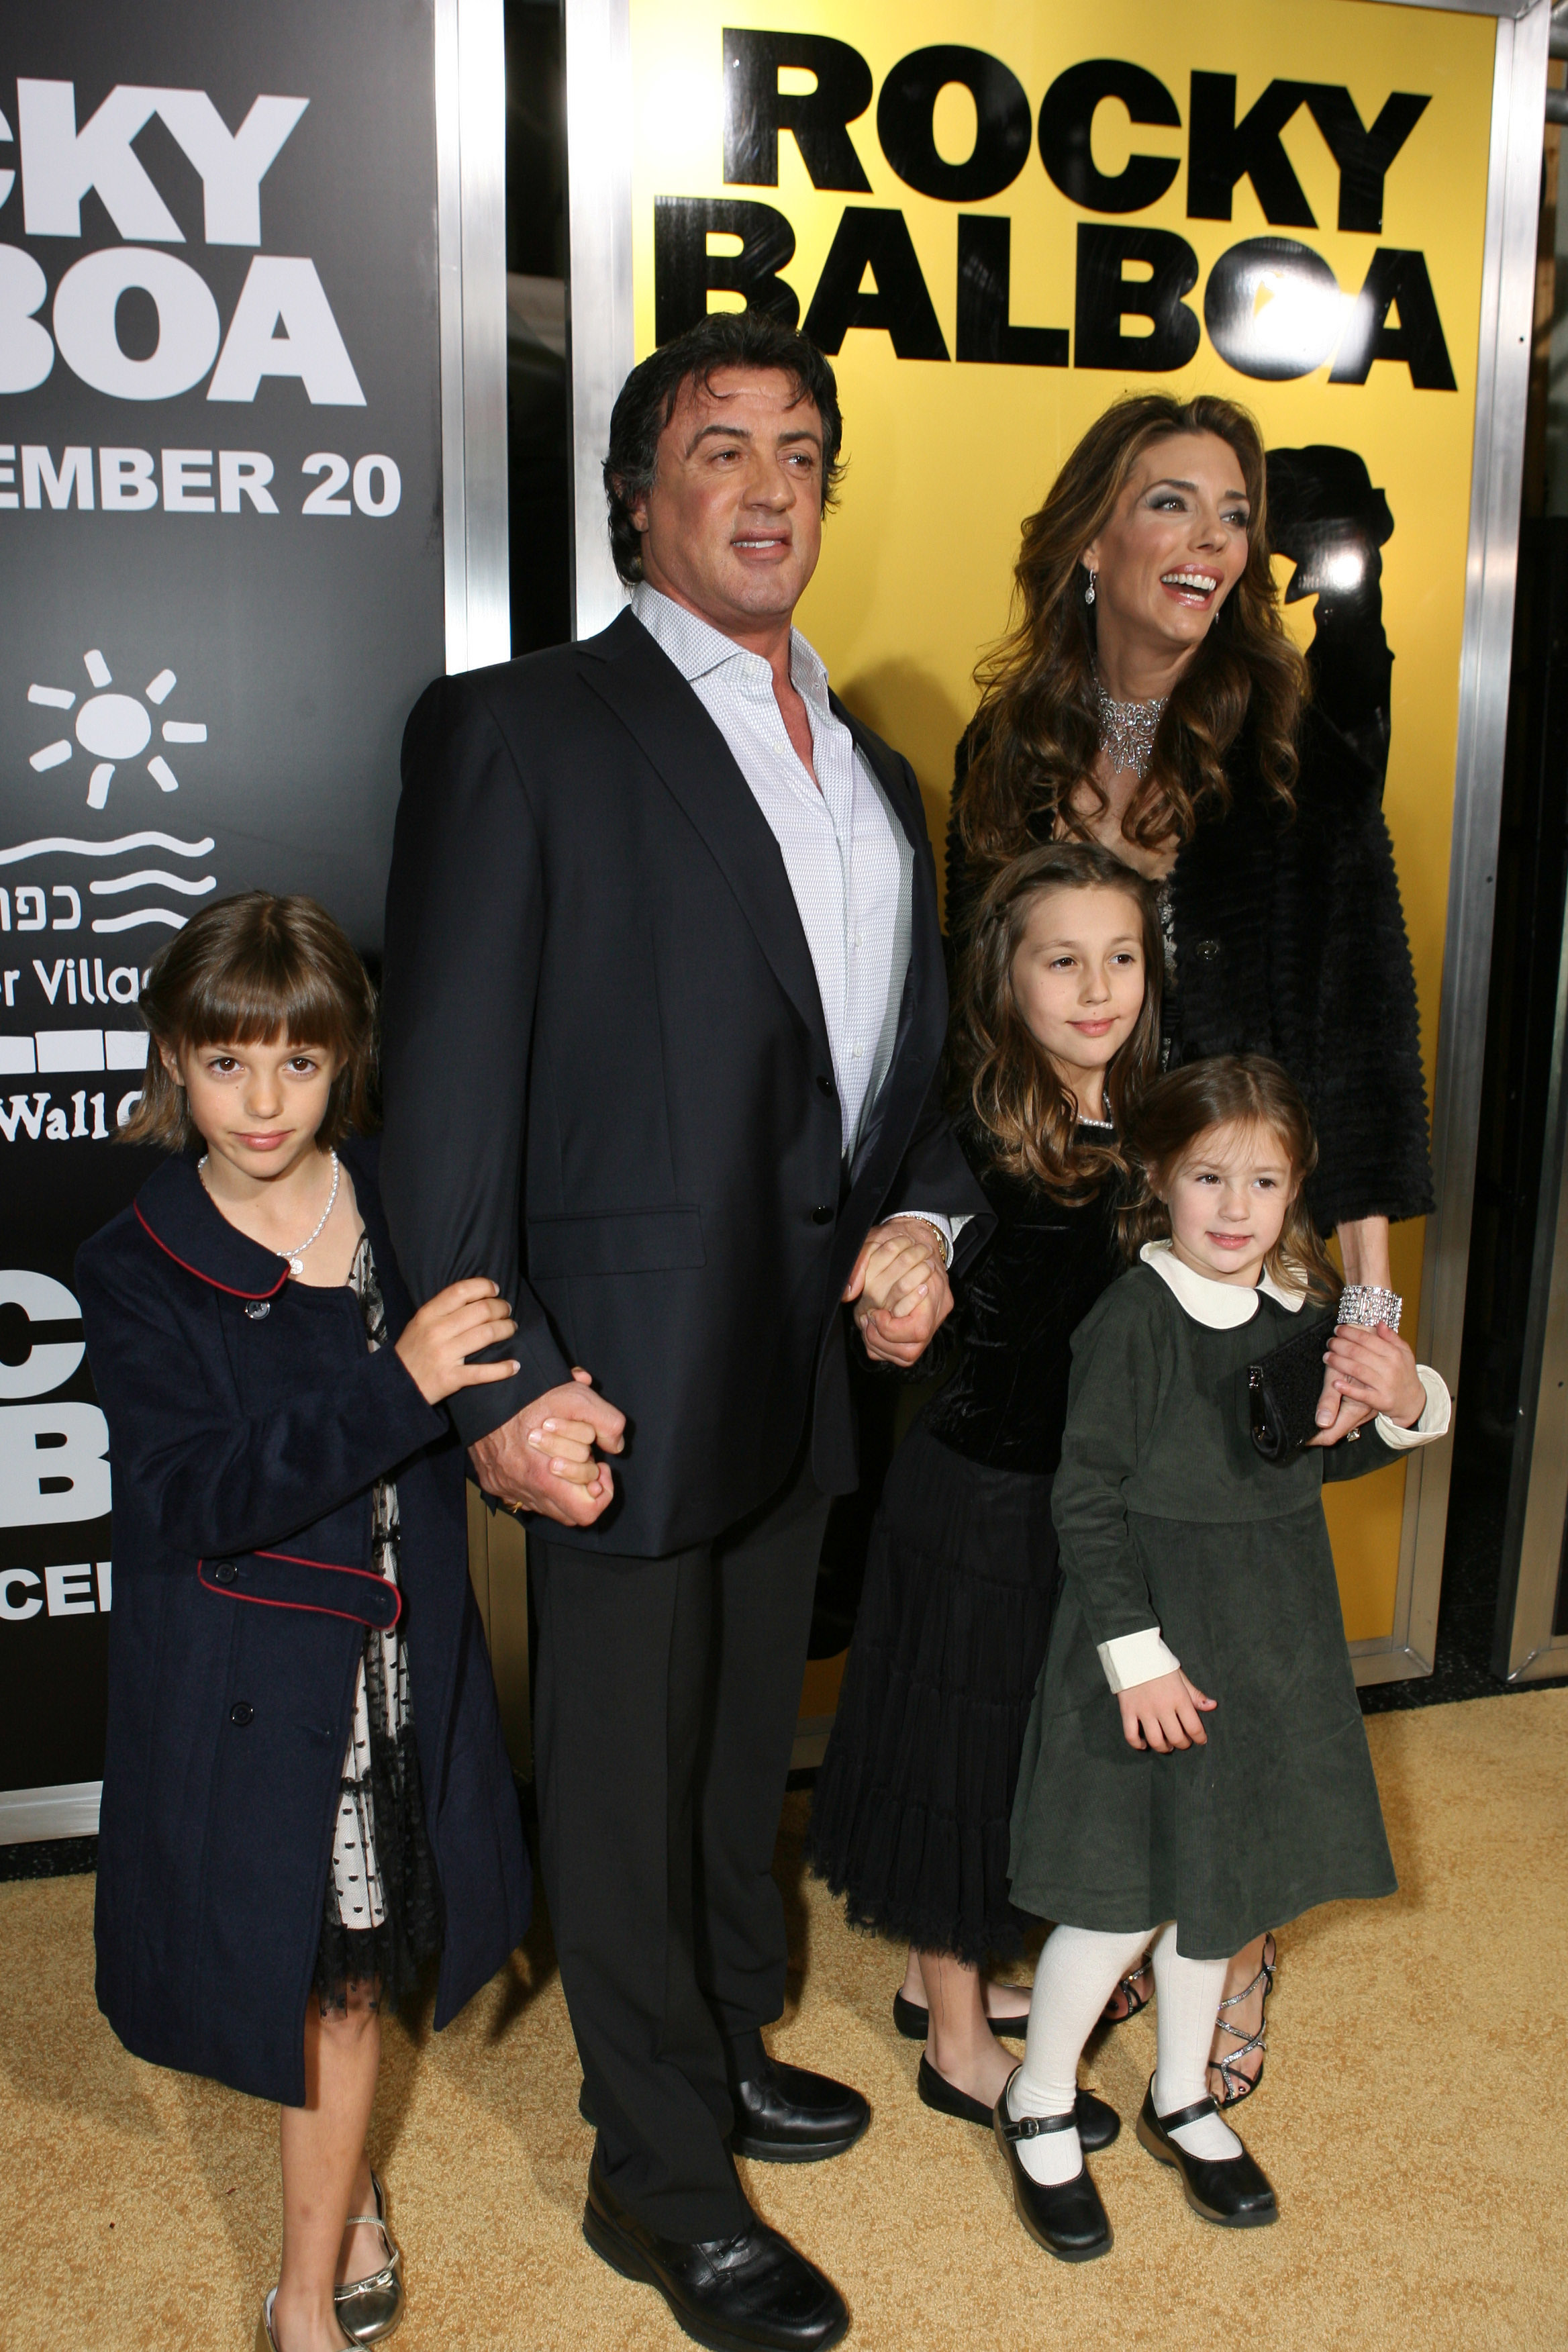 <p>Sylvester Stallone and wife Jennifer Flavin brought their daughters -- Sistine Rose Stallone, Sophia Rose Stallone and Scarlet Rose Stallone -- to the world premiere of his film "Rocky Balboa" on Dec. 13, 2006. Next, see the lovely ladies all grown up...</p>